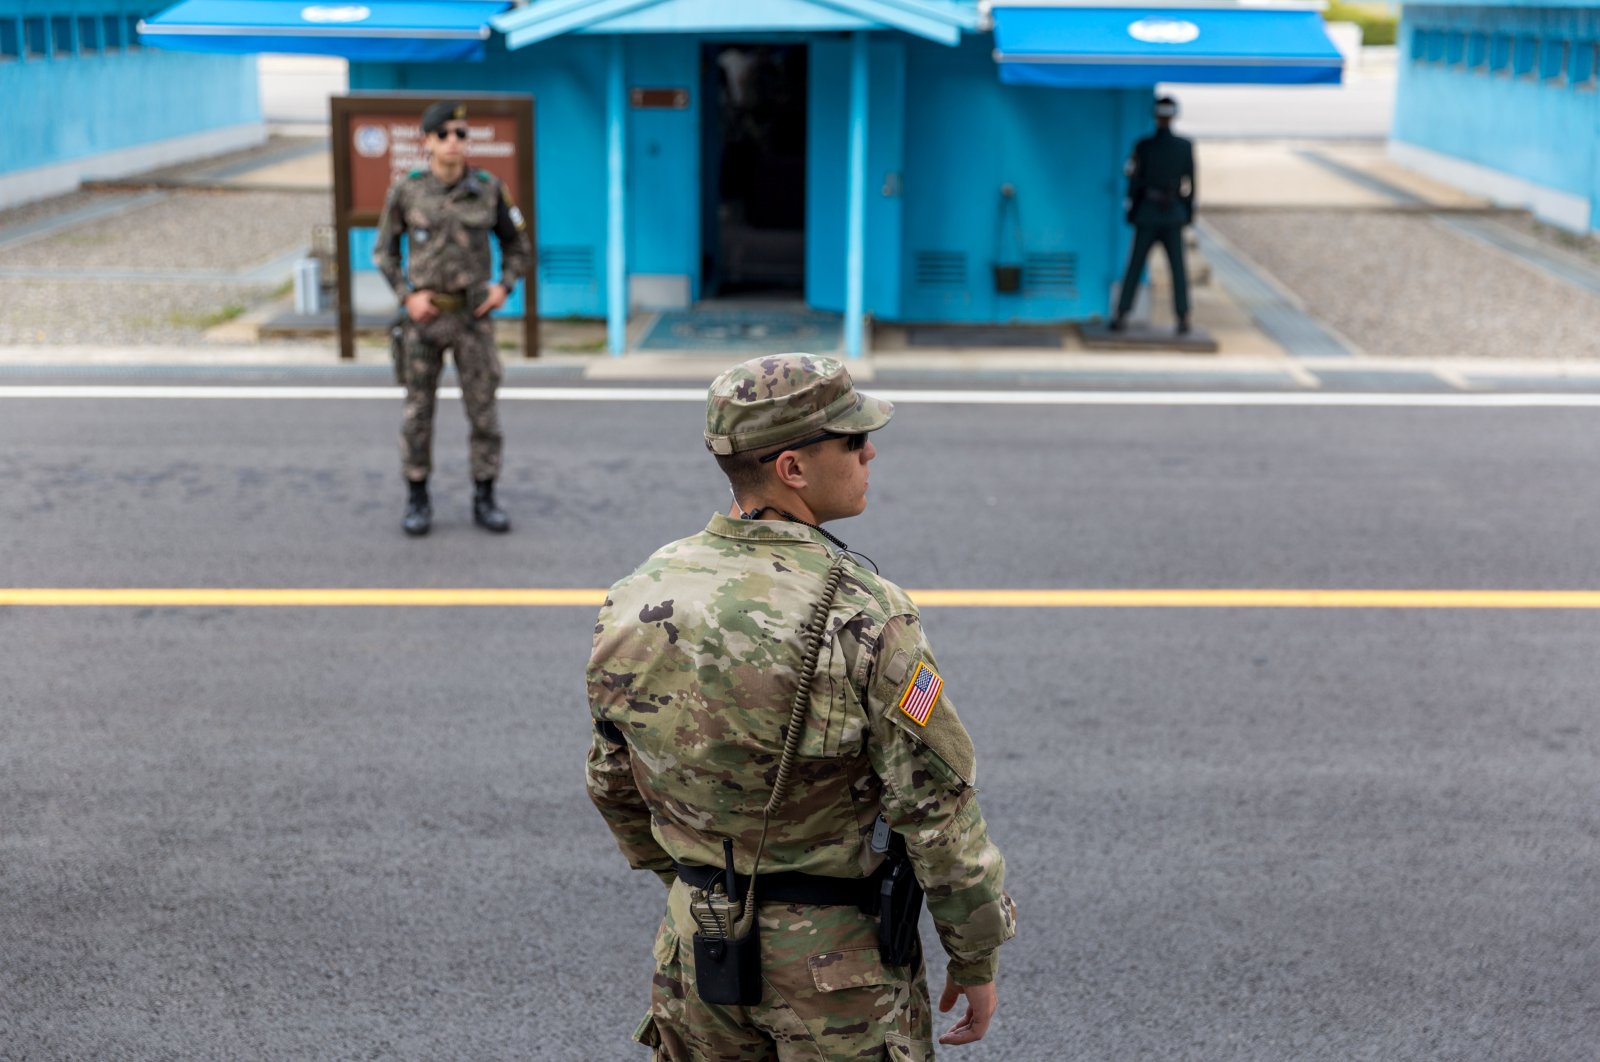 U.S. Marine and two Republic of Korea (ROK) soldiers watching over the demilitarized zone (DMZ) at the Korean border, Joint Security Area, Kaesong, South Korea, April 22, 2017. (Shutterstock Photo)